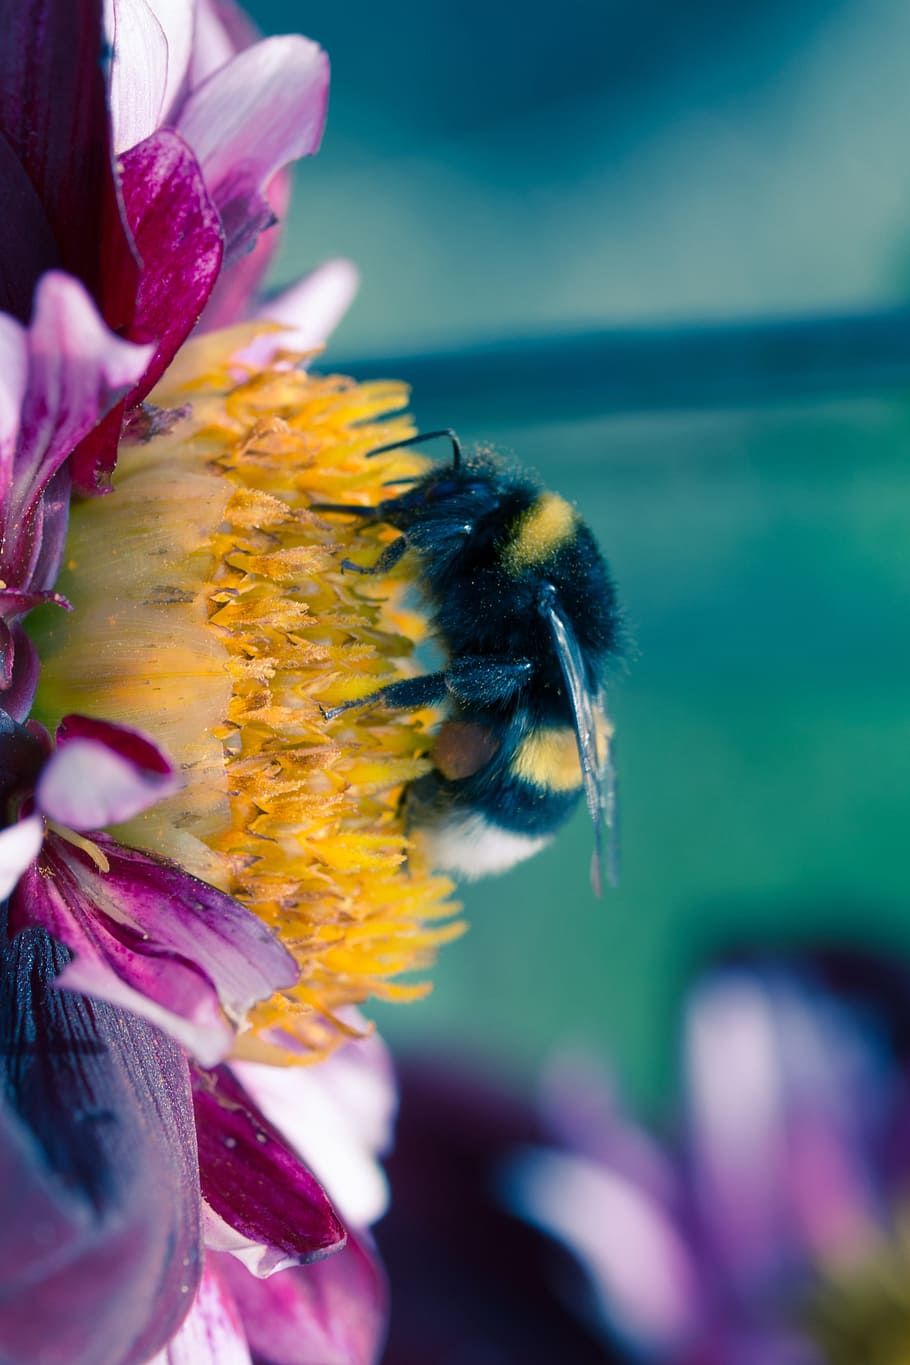 pollinating, bee, animal, fly, insect, hortensis, dahlia, fresh, flower, nature